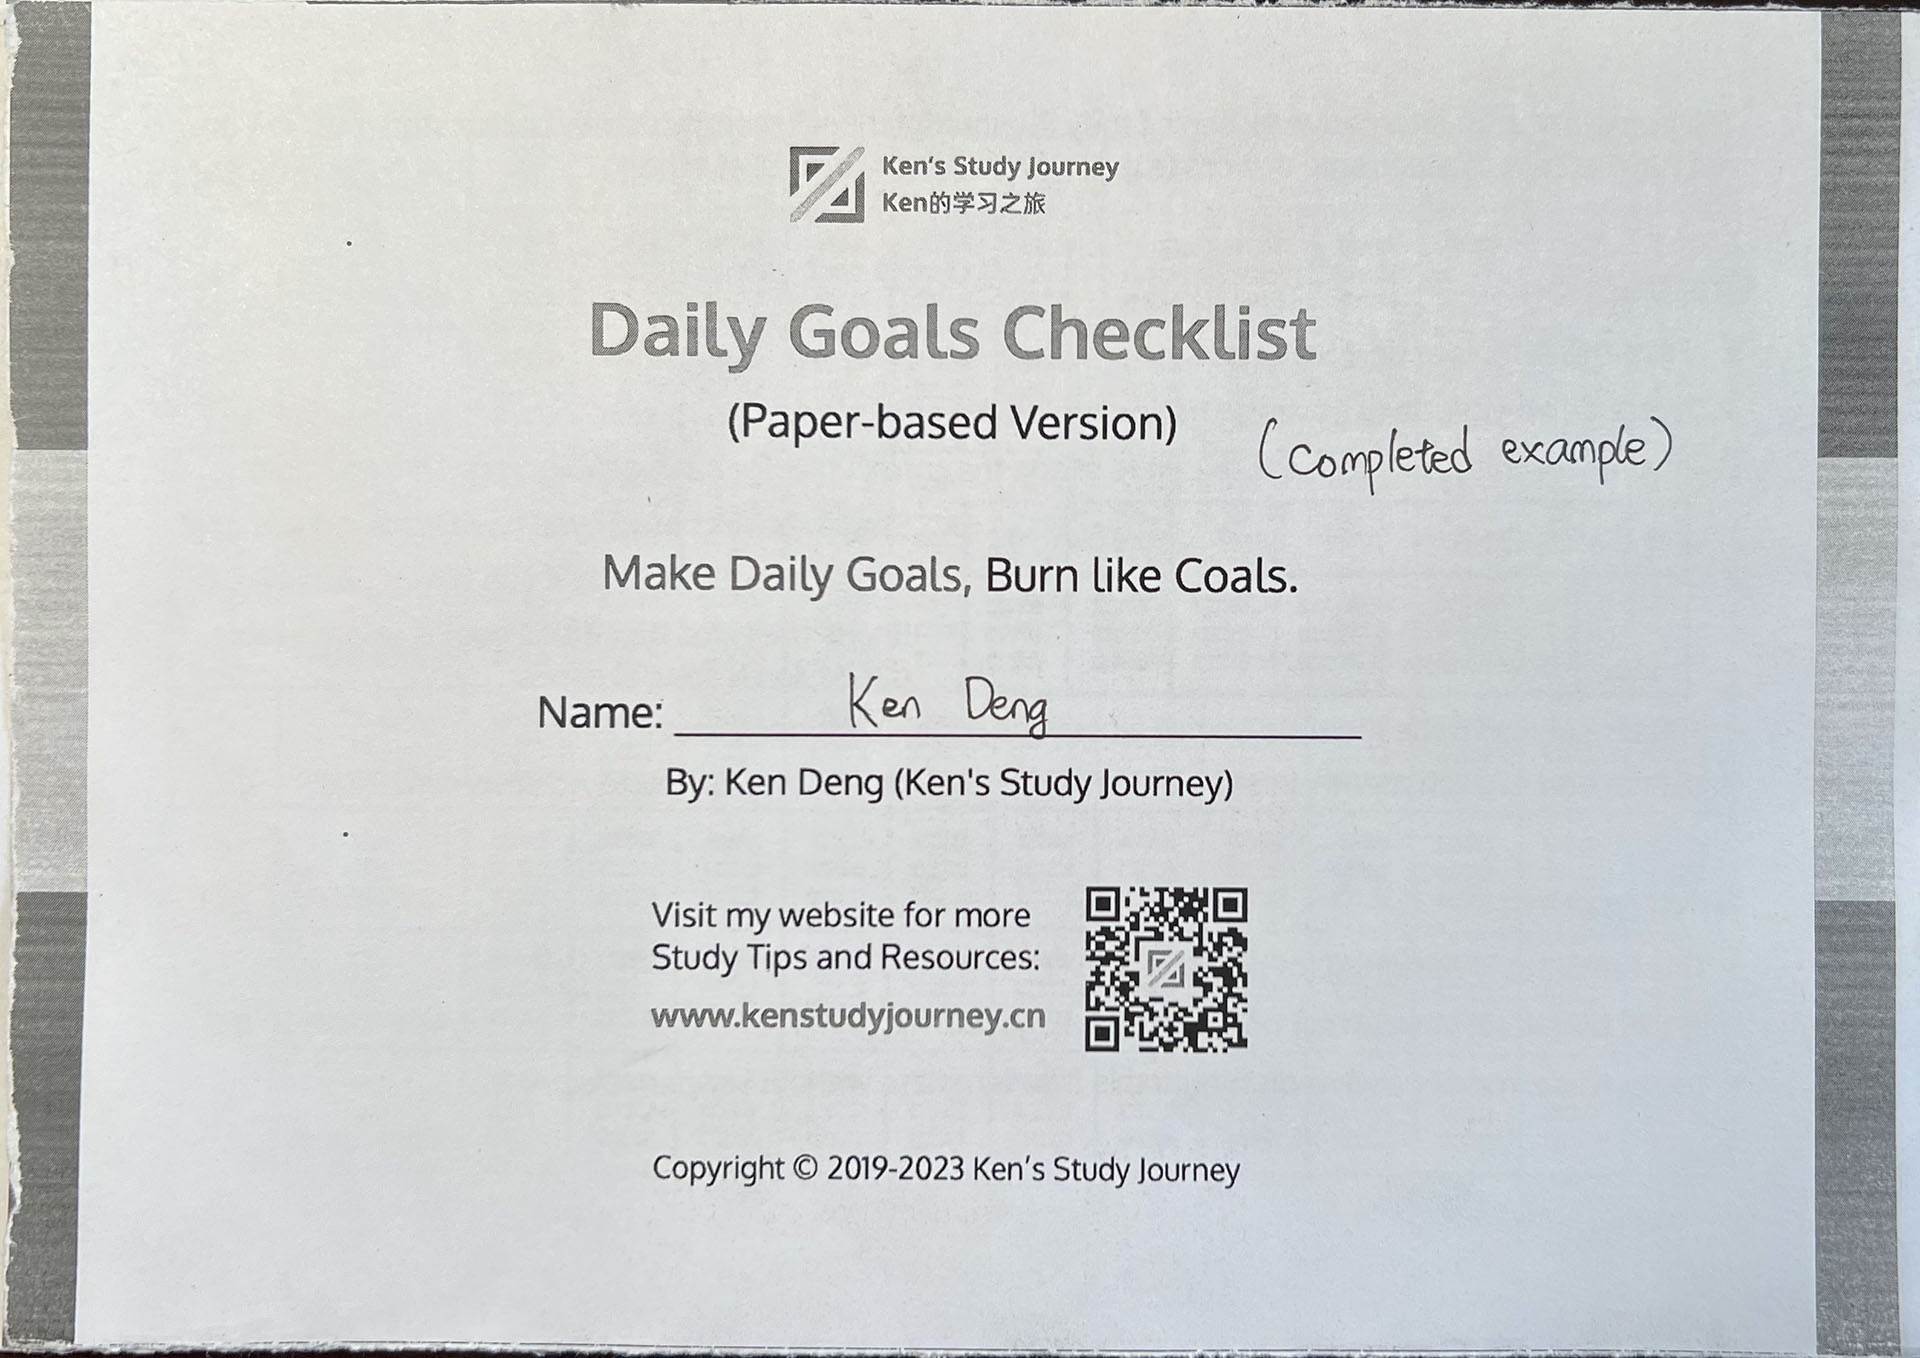 Daily Goals Checklist on an A5 Paper